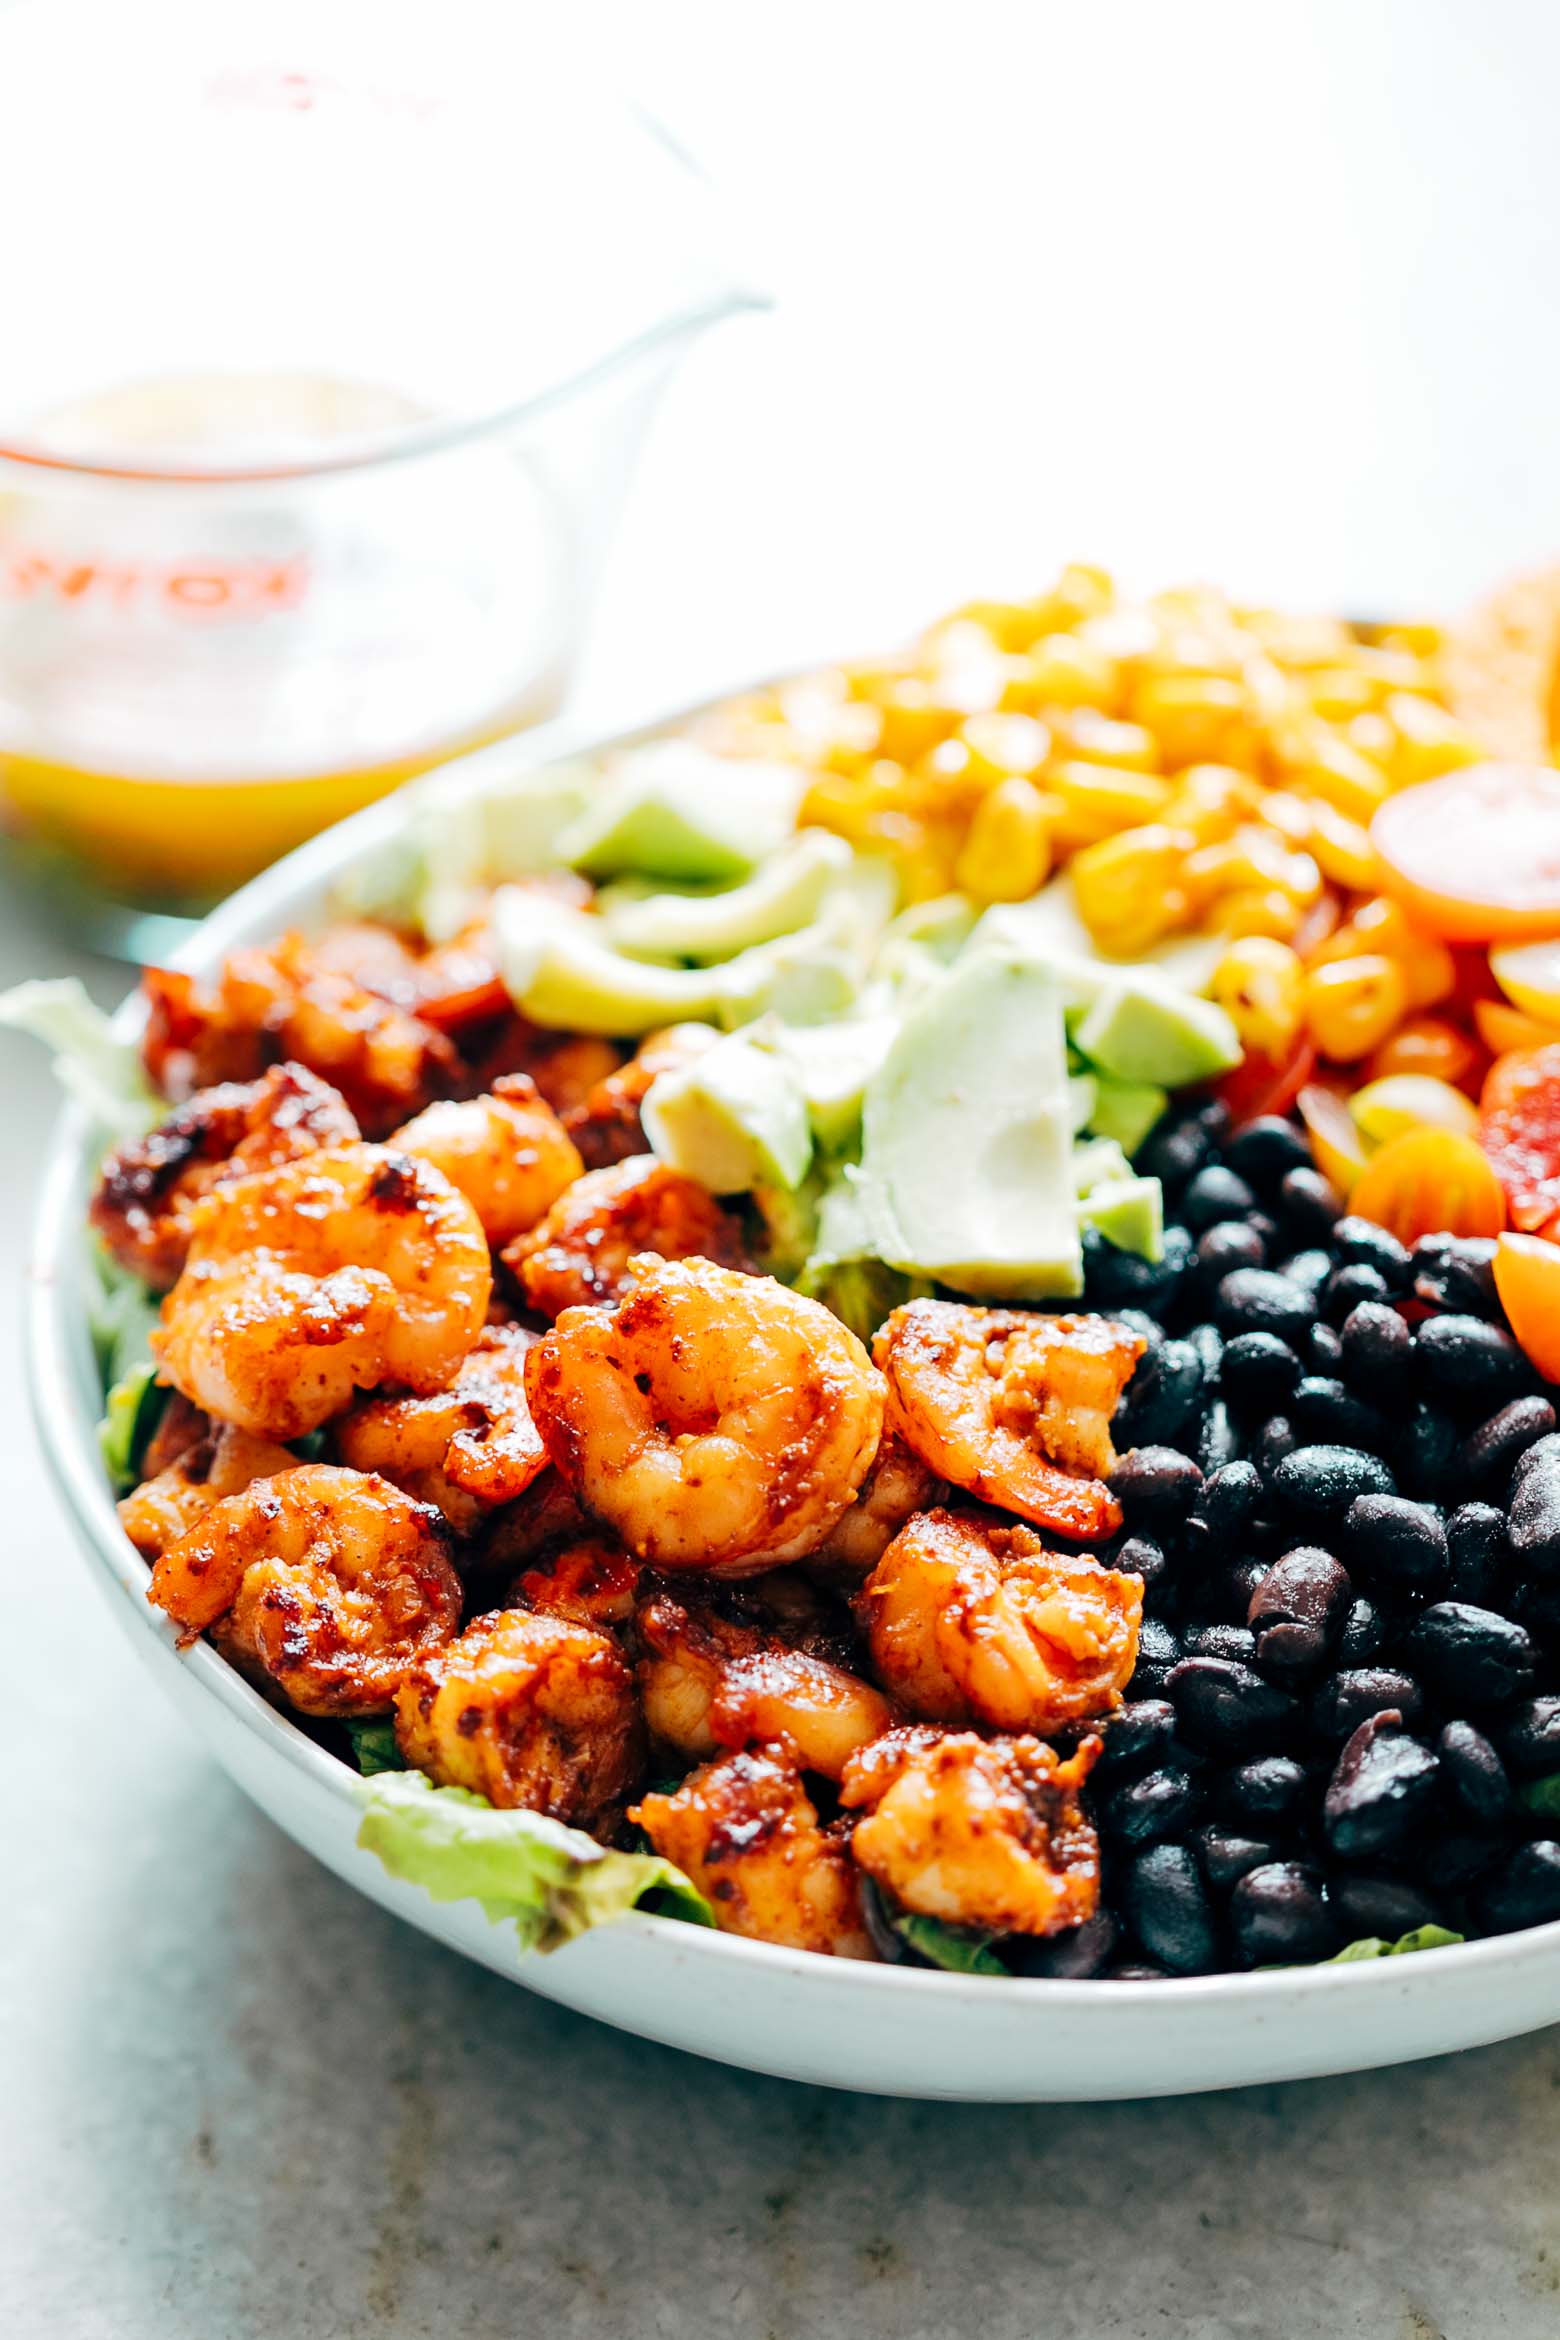 Mexican Prawn Avocado Taco Salad is a delicious, hearty salad that has all the flavours of your favourite mexican taco, but healthier. Loaded with lettuce, black beans, avocado, cherry tomatoes, corn and a delicious cilantro lime dressing, it's perfect when you want salad for dinner.